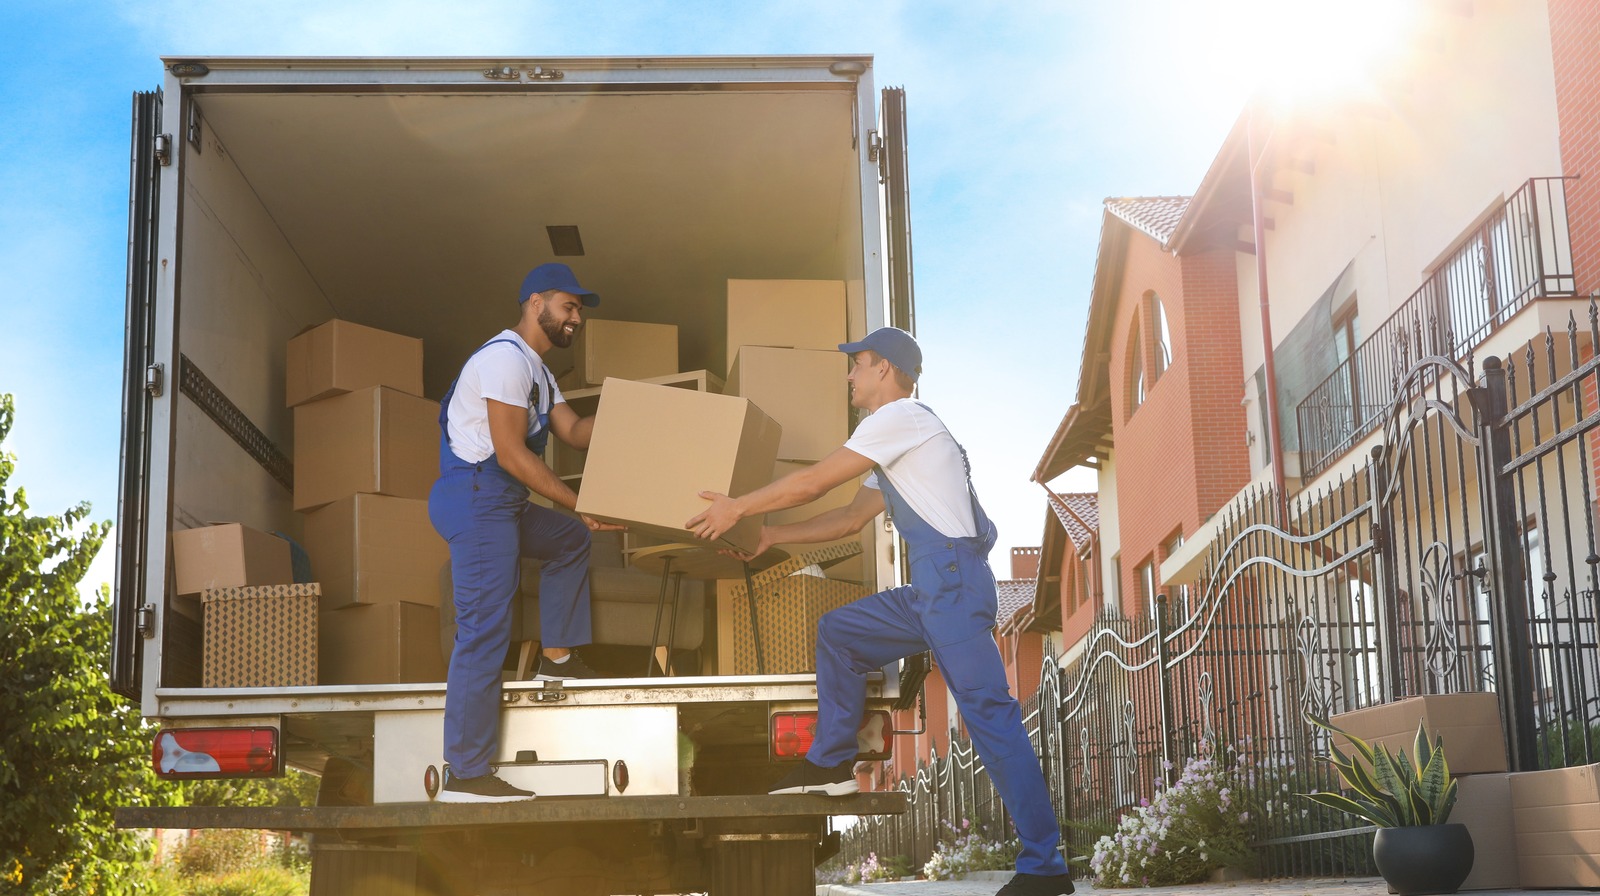 The Most Important Thing To Consider When Choosing A Moving Company